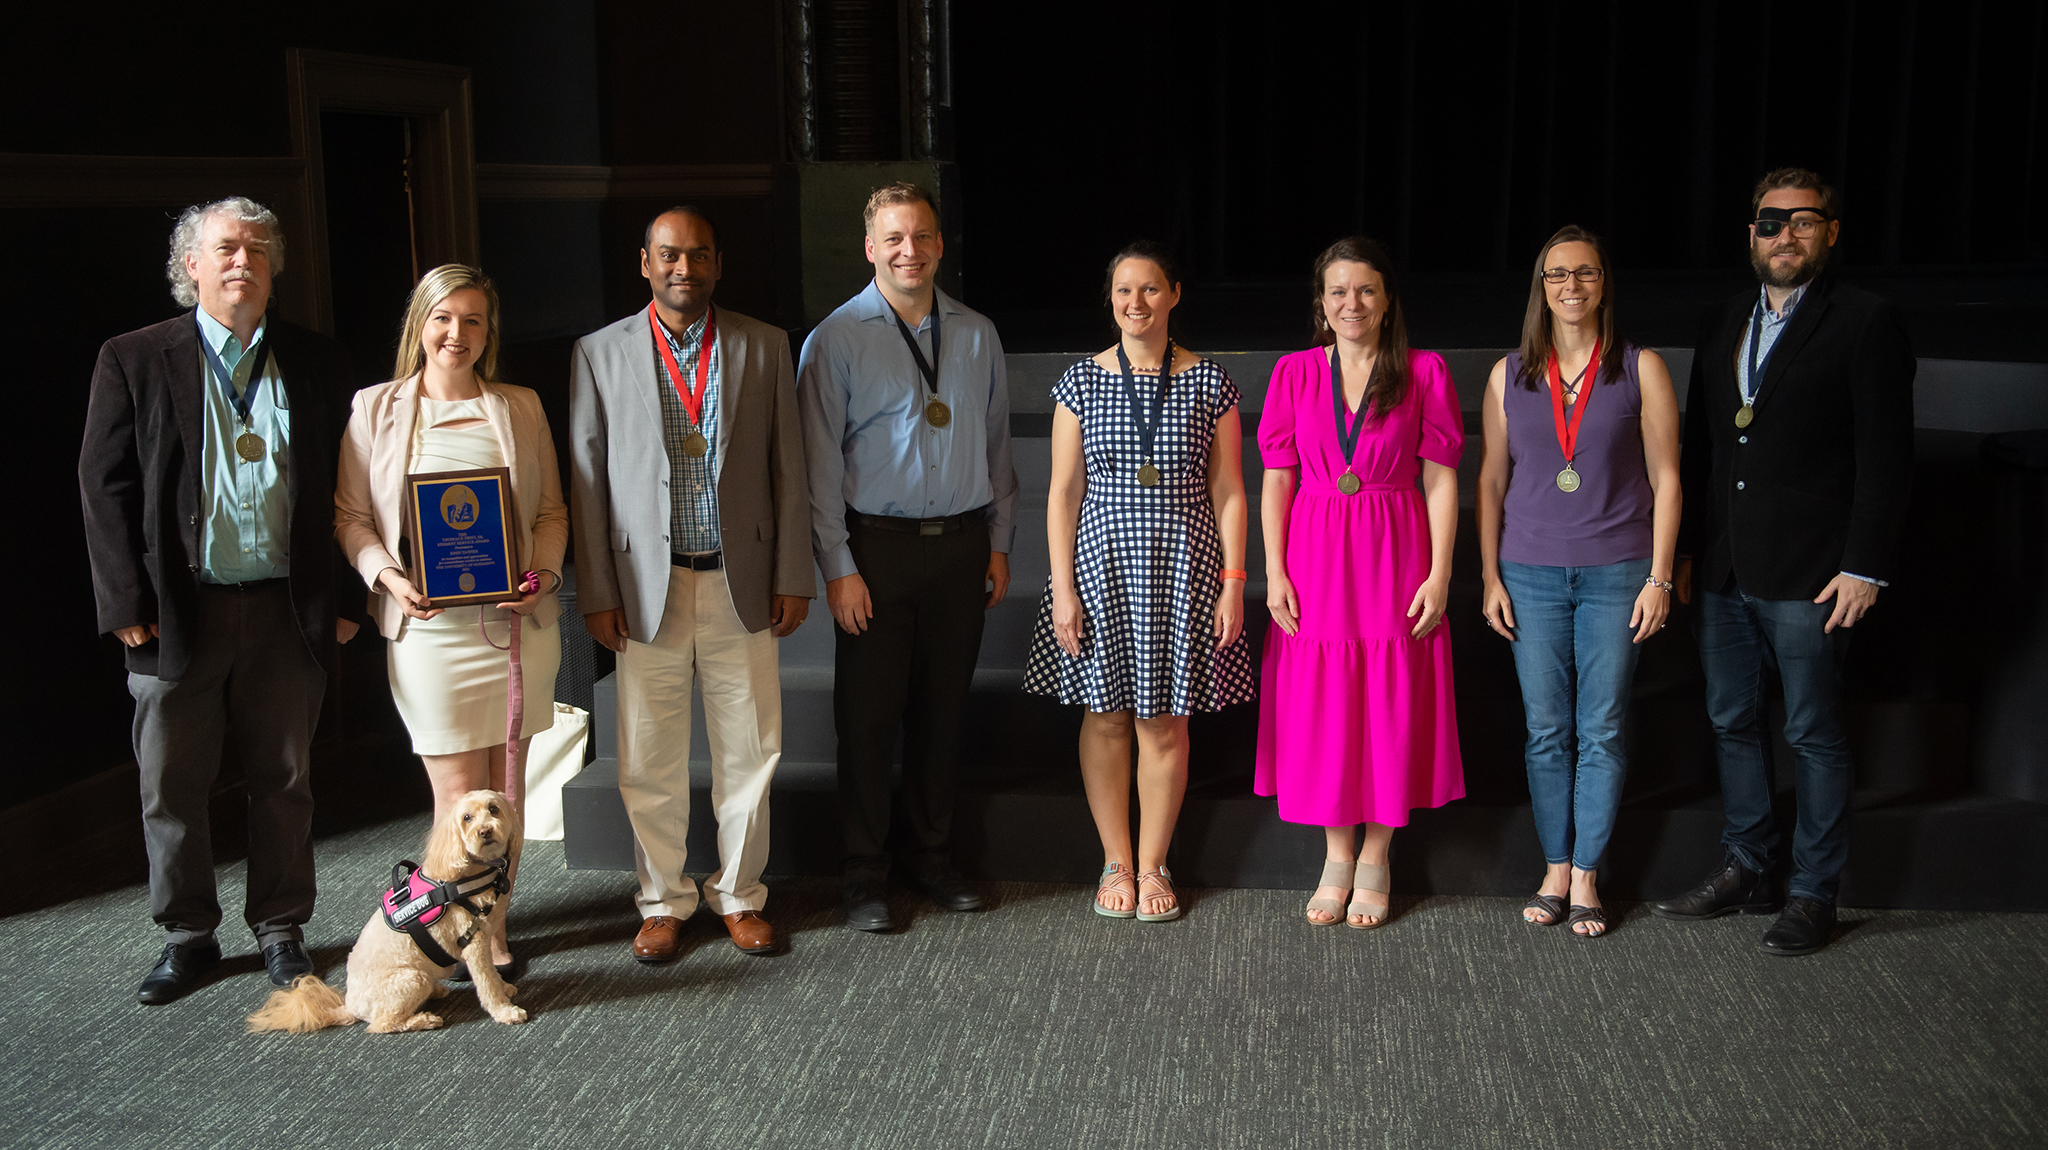 Faculty award-winners pose together 